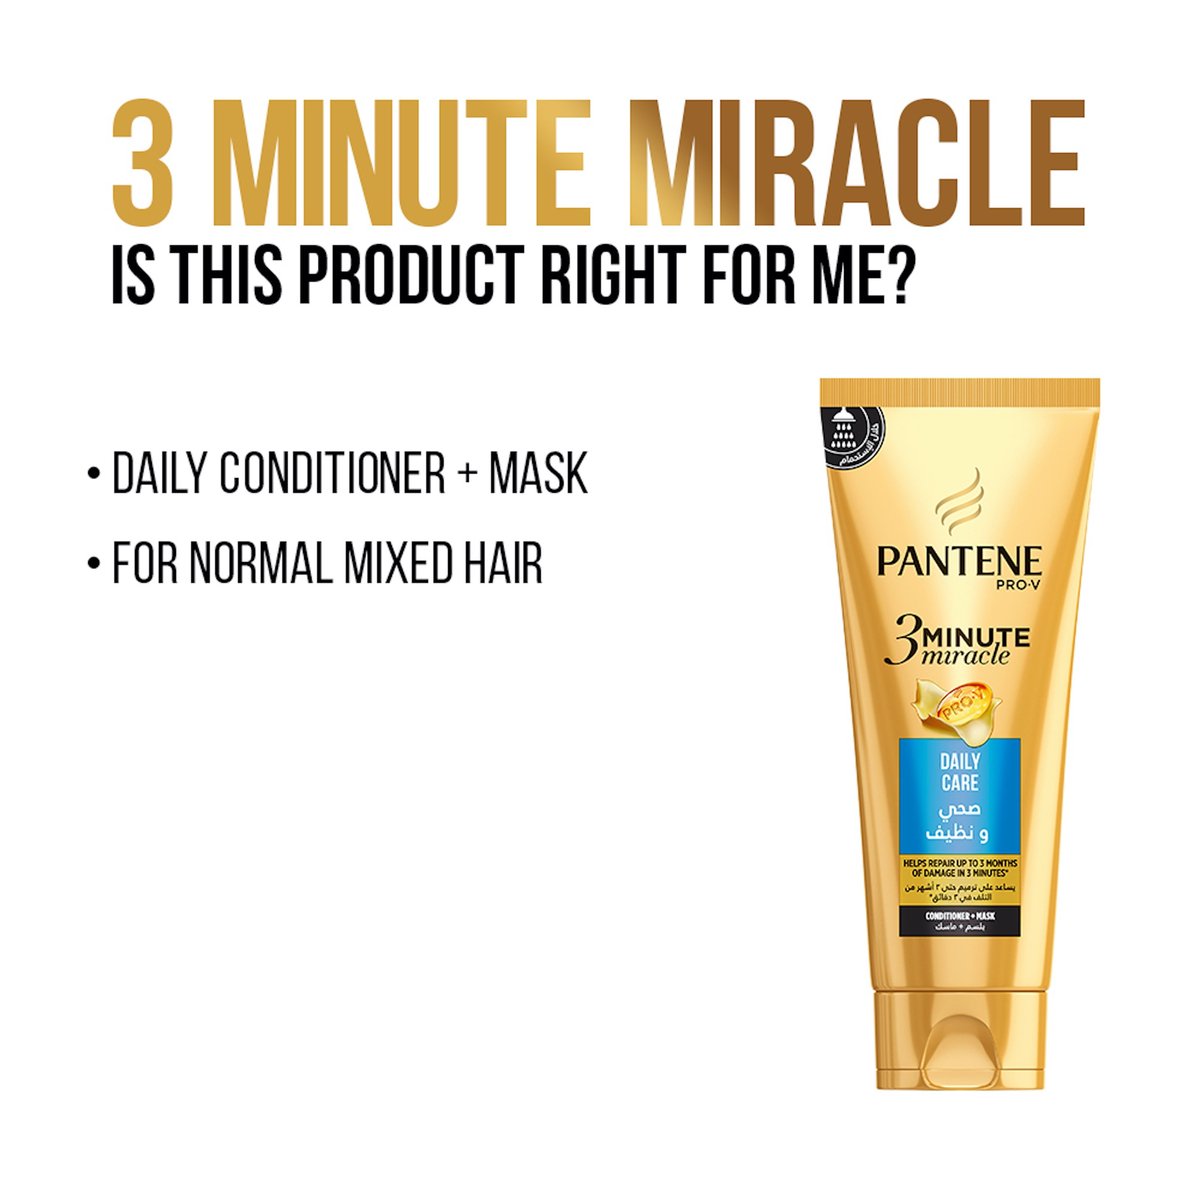 Pantene Pro-V 3 Minute Miracle Daily Care Conditioner + Mask 200 ml & Pantene Pro-V Daily Care 2in1 Shampoo 400 ml 